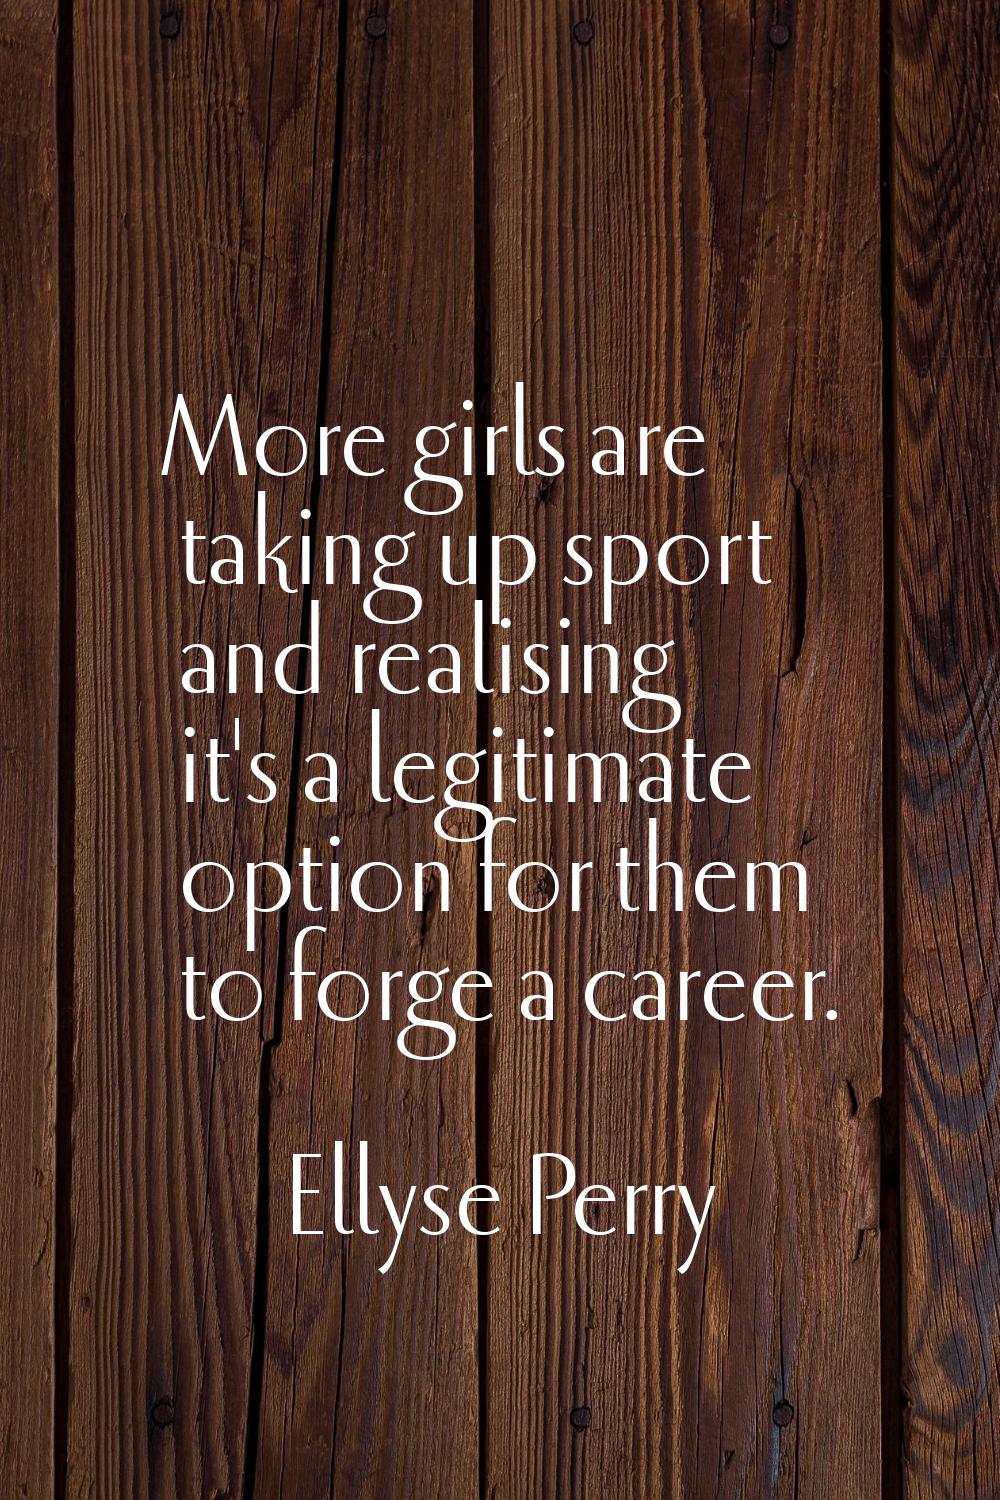 More girls are taking up sport and realising it's a legitimate option for them to forge a career.